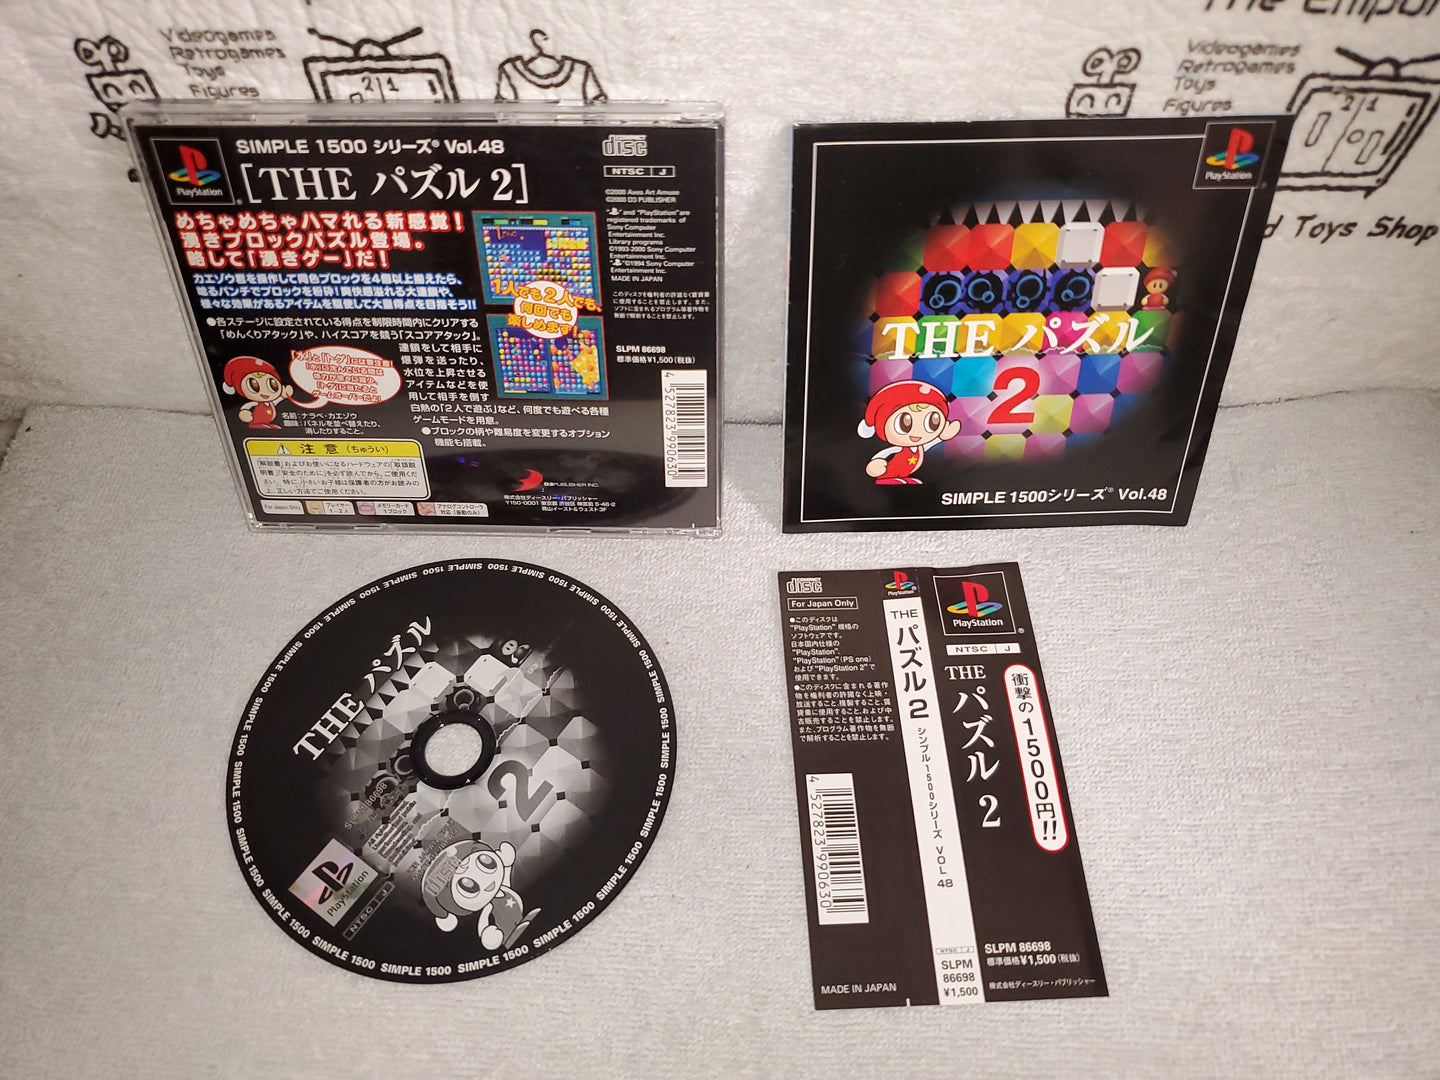 Simple1500 vol48 THE PUZZLE 2 - sony playstation ps1 japan